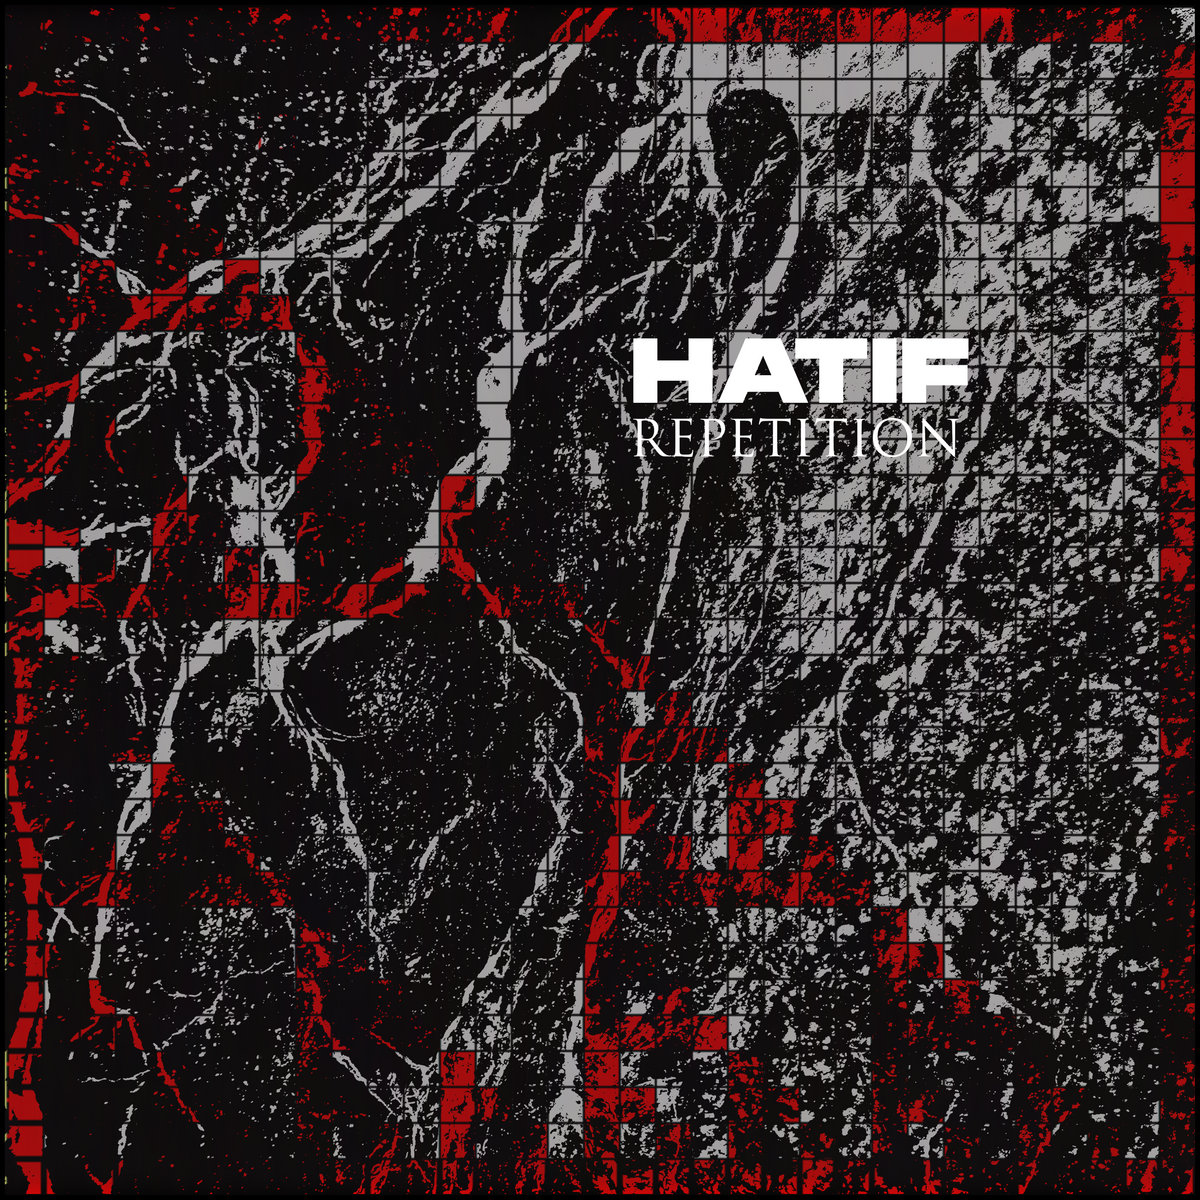 Hatif - Repetition - Hatif - Repetition